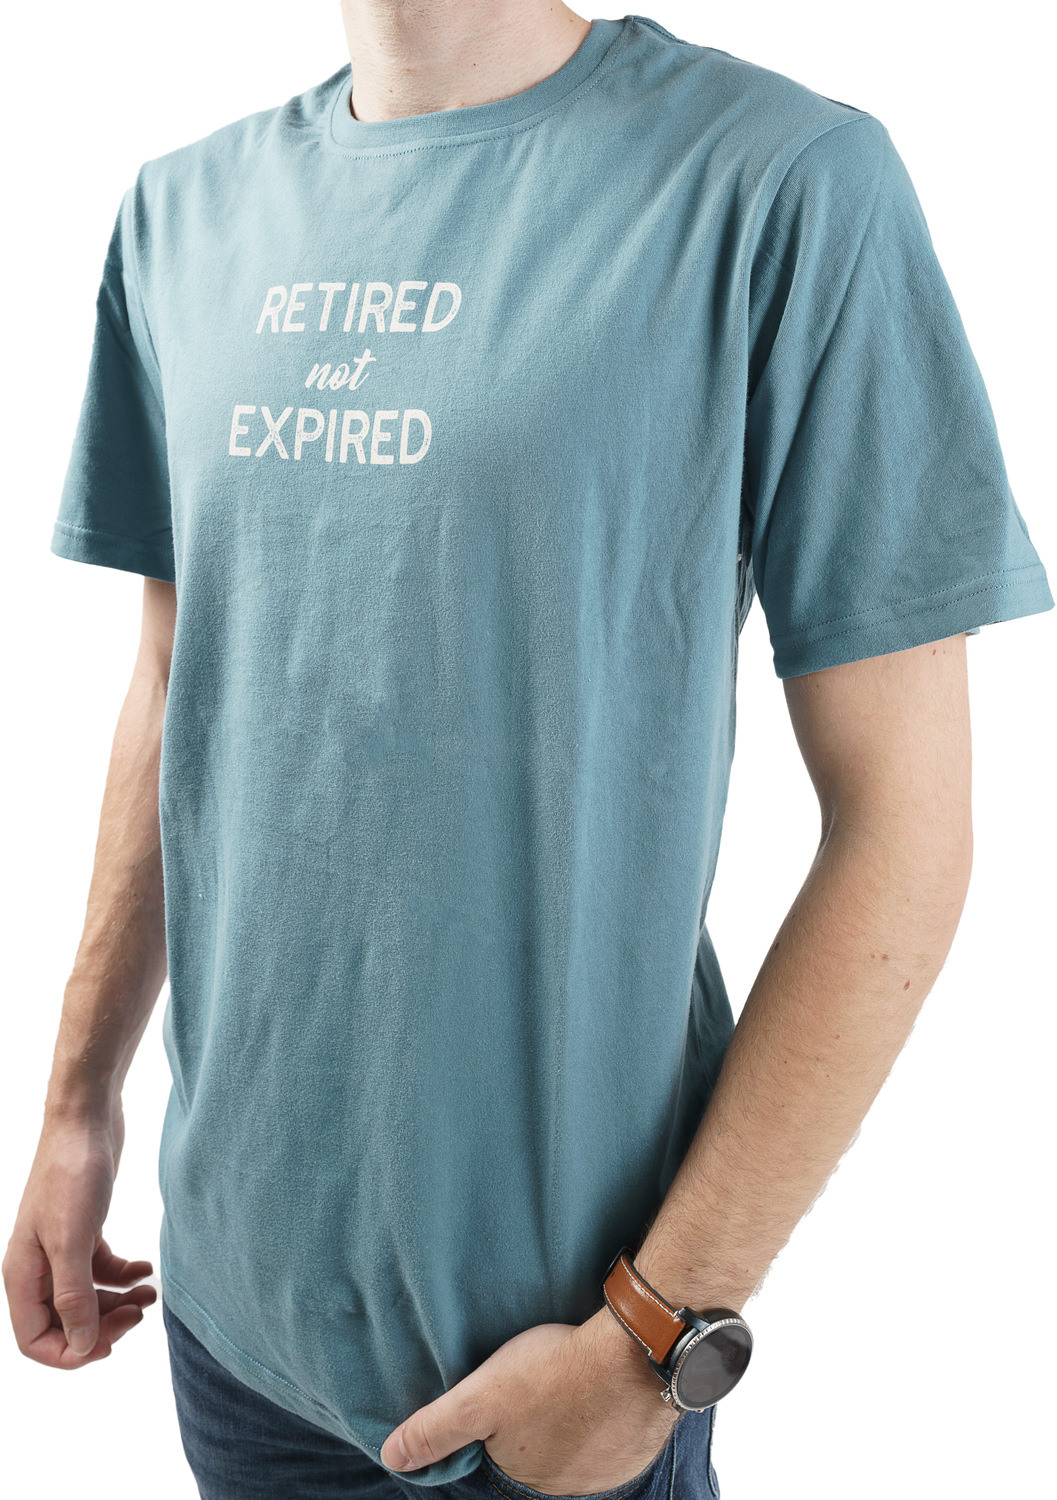 Not Expired by Retired Life - Not Expired - Small Steel Blue Unisex T-Shirt